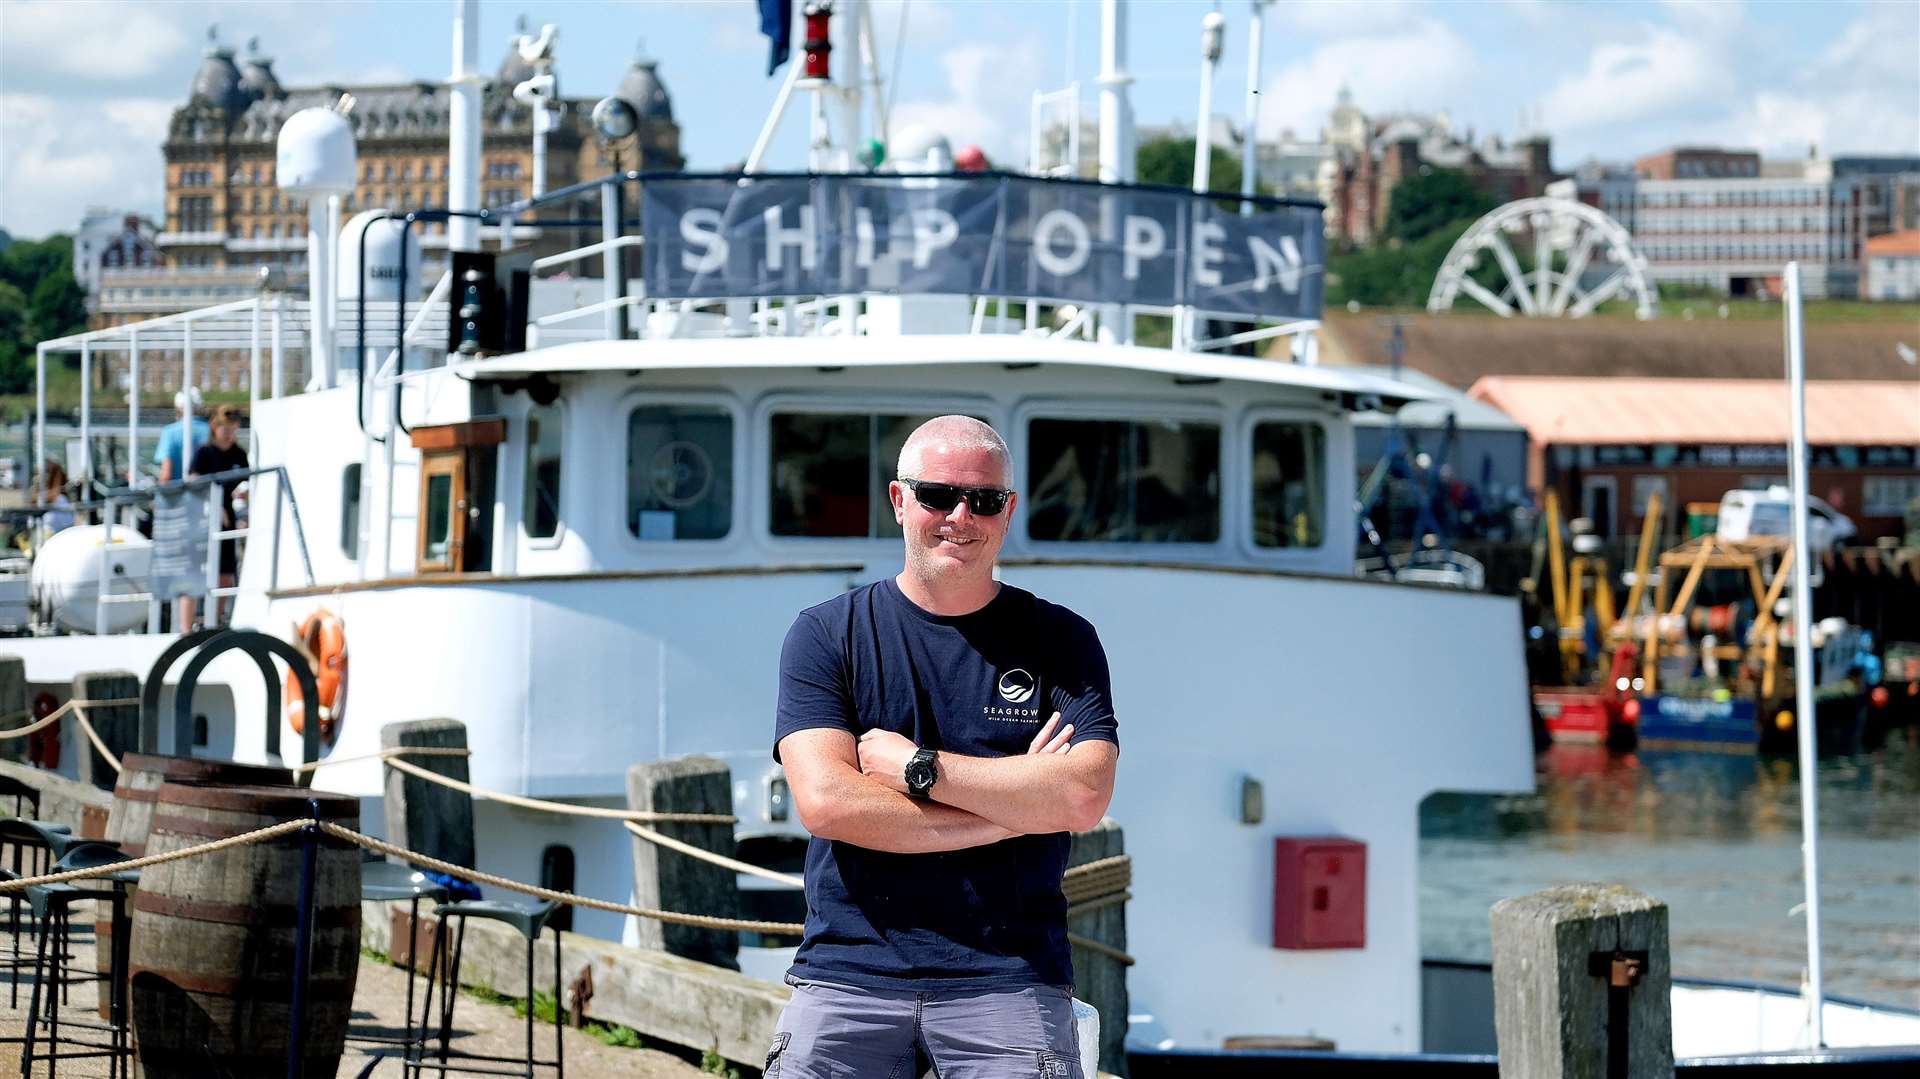 KELP HELP: Seagrown is a new venture by Wave Crookes pictured in Scarborough Harbour.